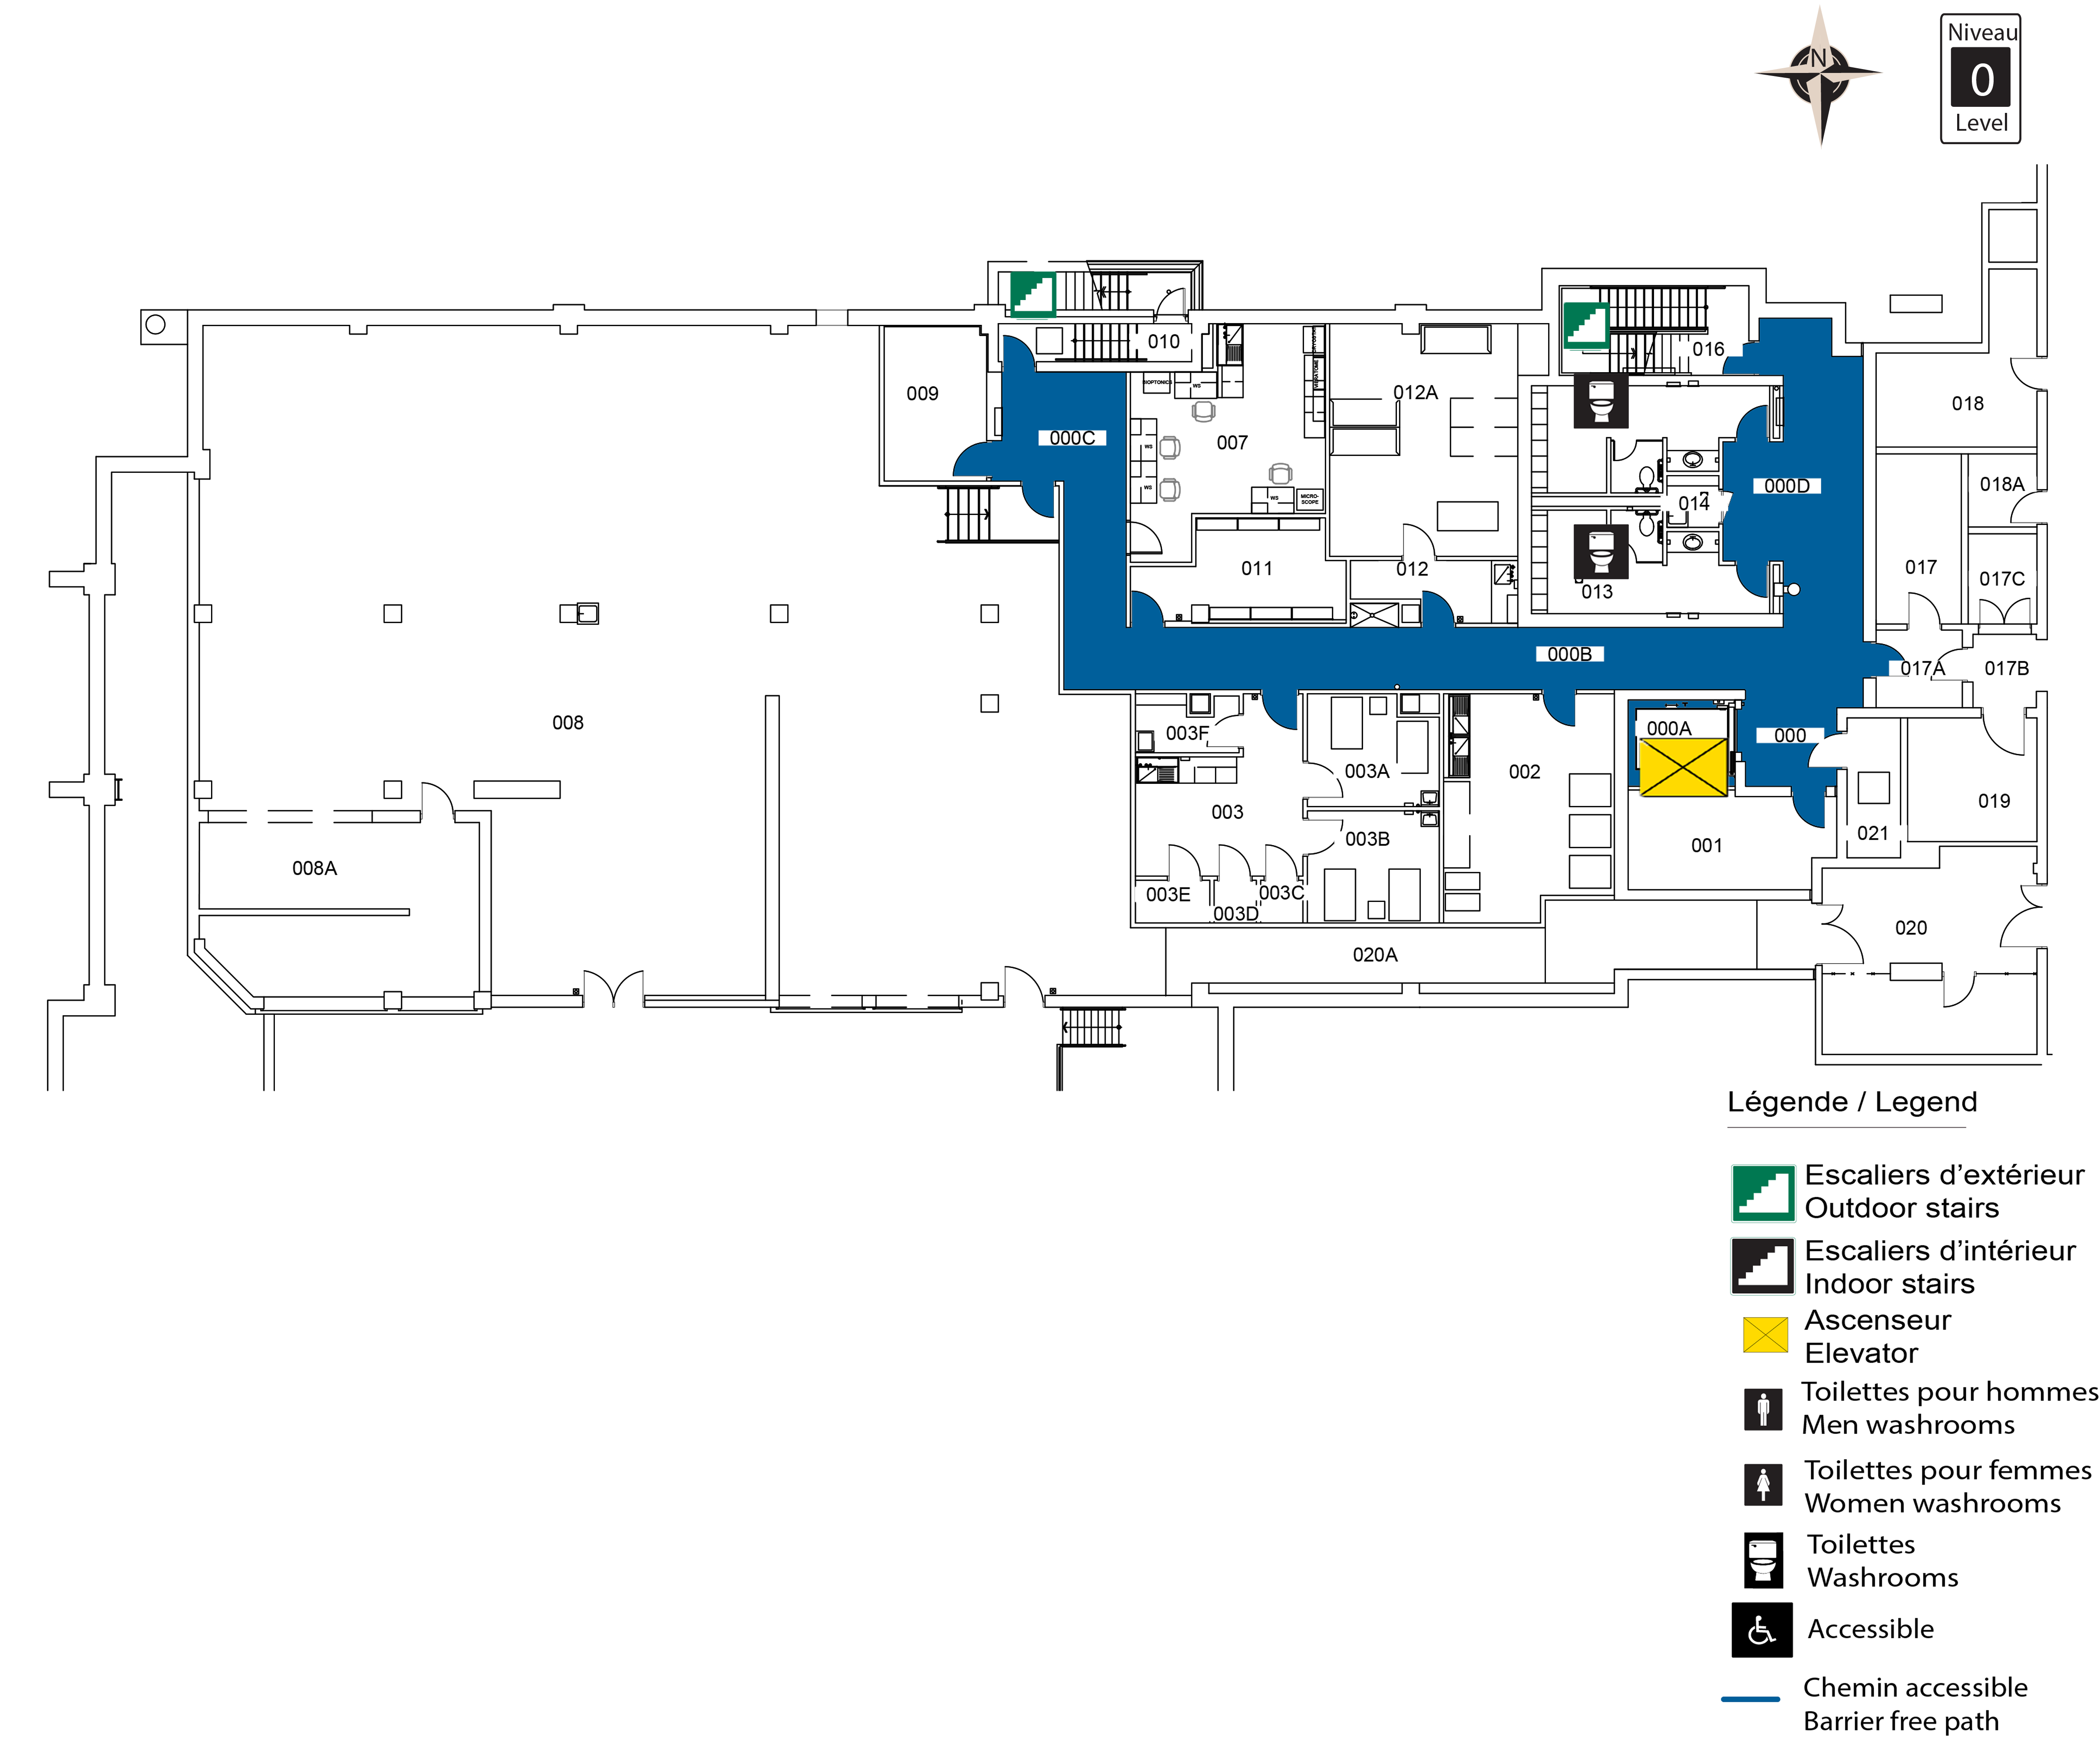 Accessible map - BSC level 0